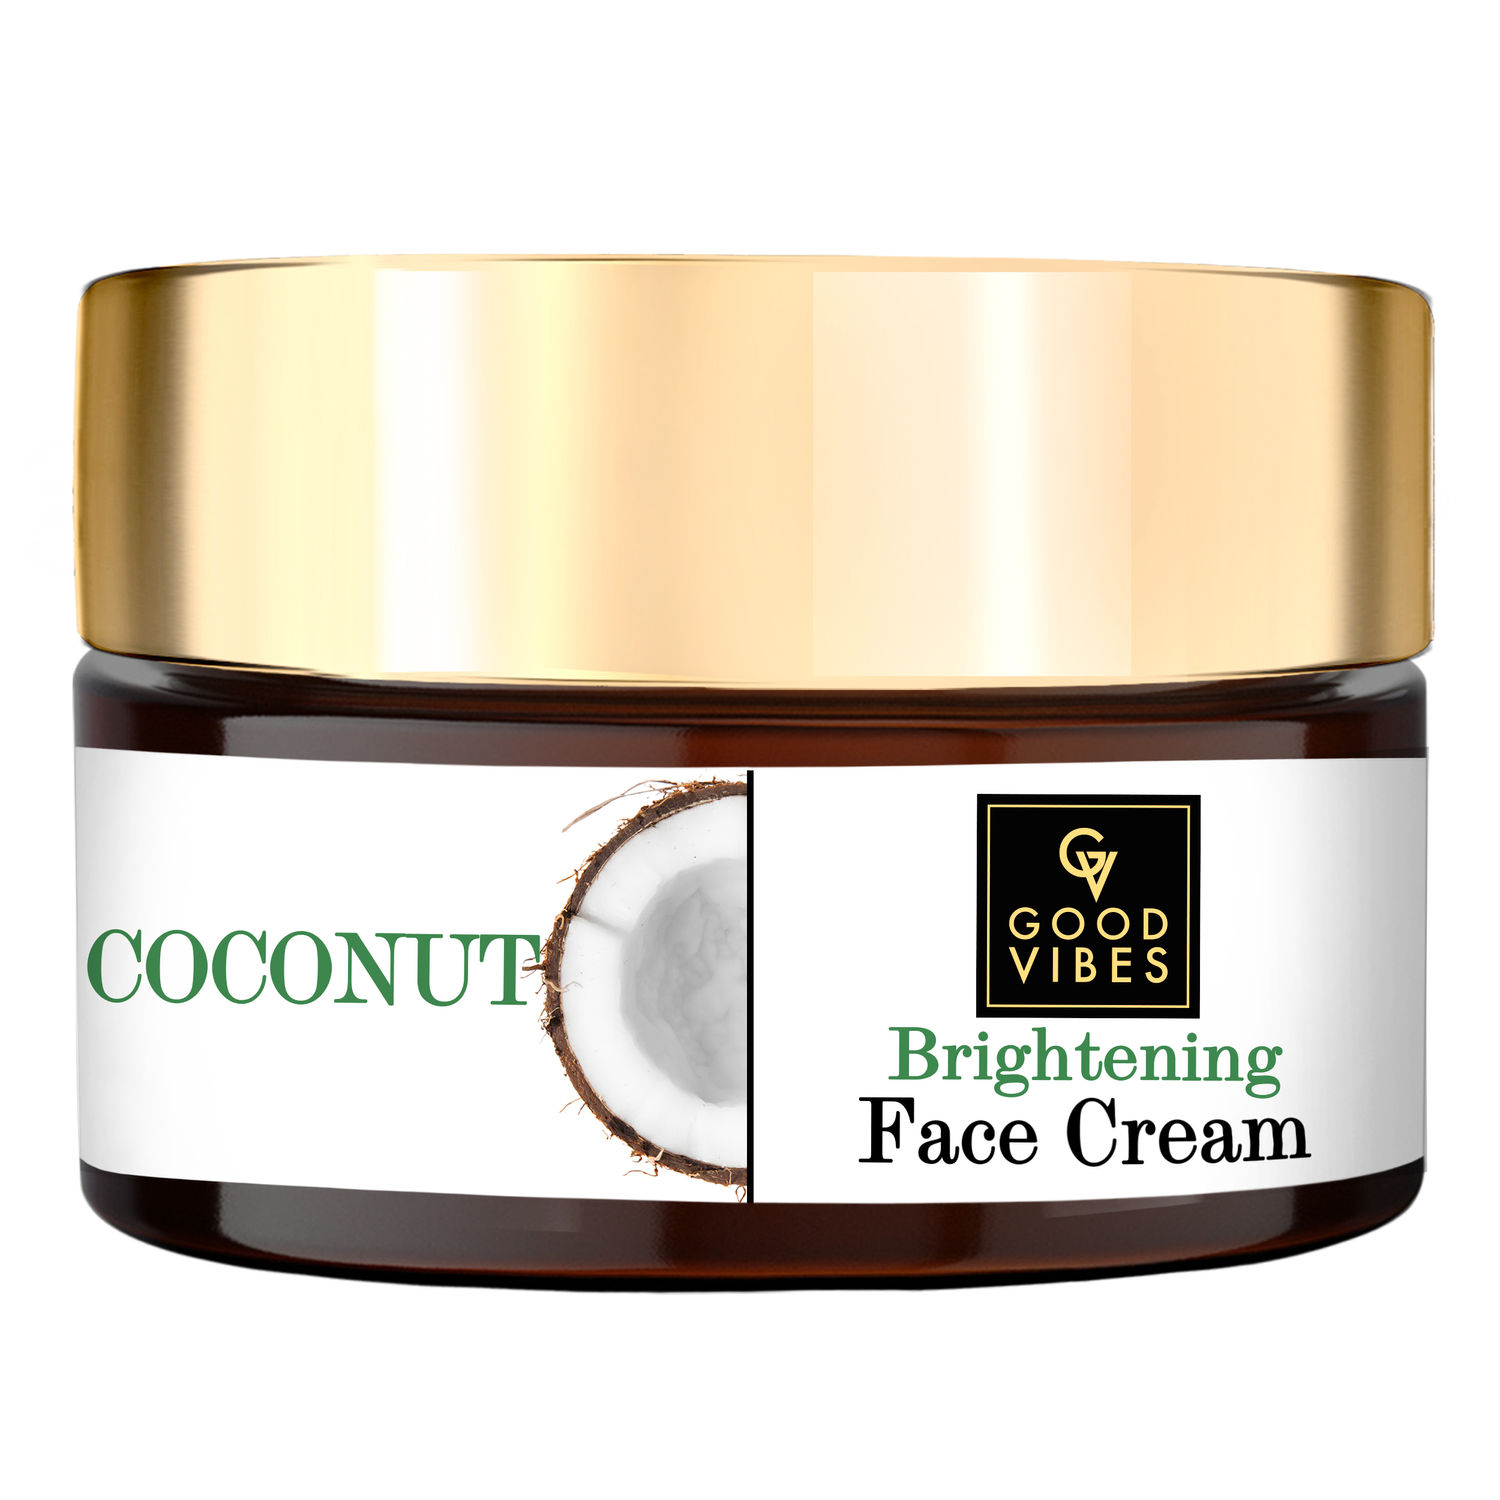 Buy Good Vibes Coconut Brightening Face Cream | Moisturizing, Provides Glow | No Parabens, No Sulphates, No Mineral Oil, No Animal Testing (100 g) - Purplle